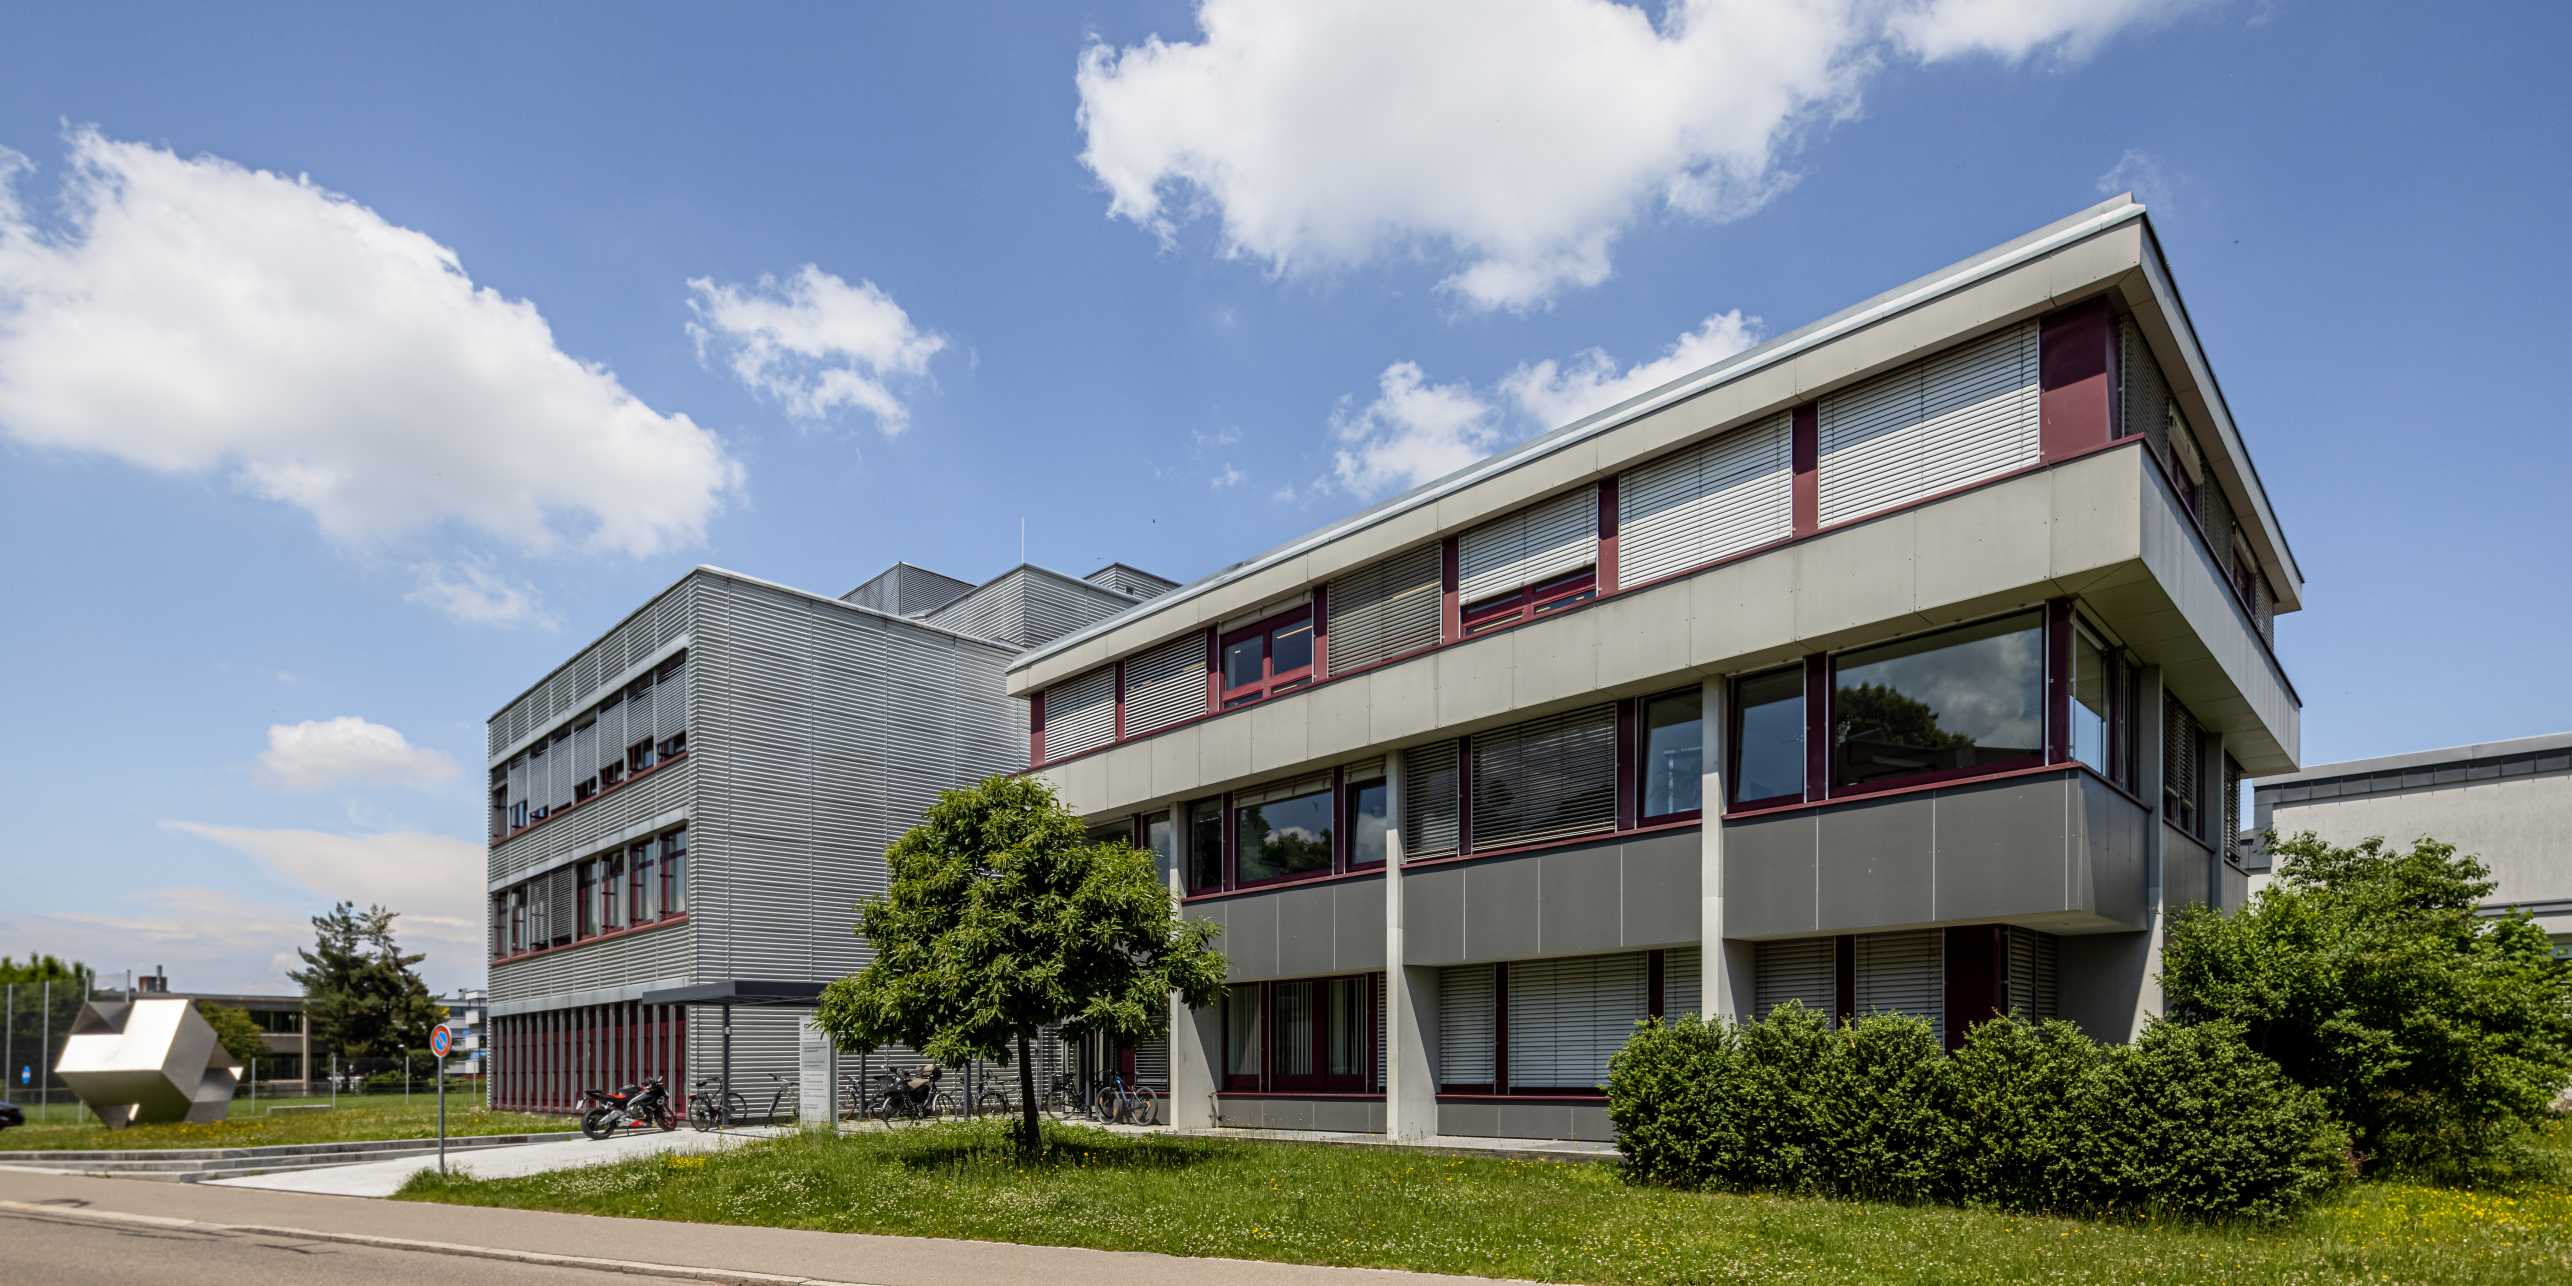 Building "Part of the Department of Health Sciences and Technology (D-HEST)" in Schwerzenbach